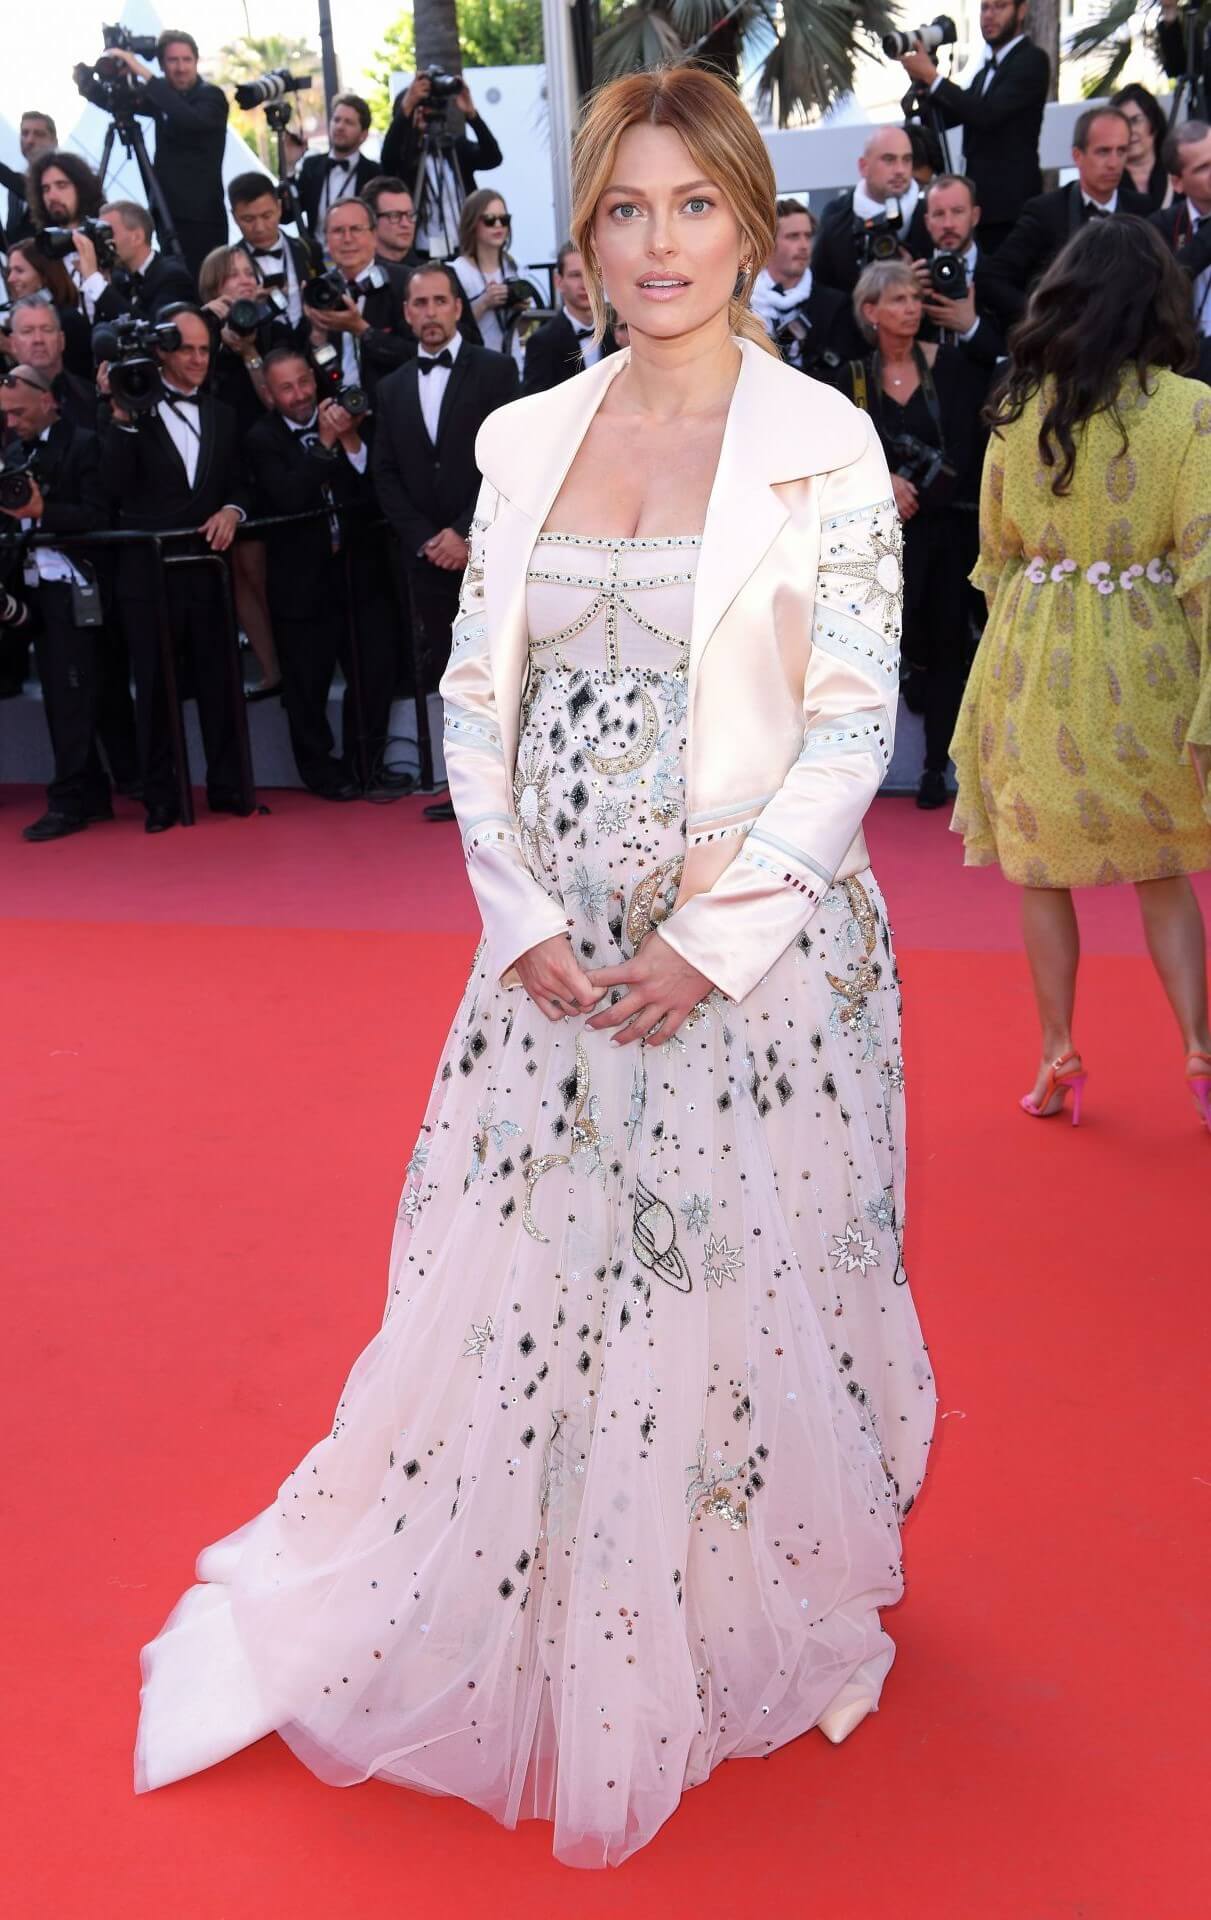 Caroline Receveur In White Shimmery Embroidery Flare Gown With Coat At “Girls of the Sun” Premiere In Cannes Film Festival